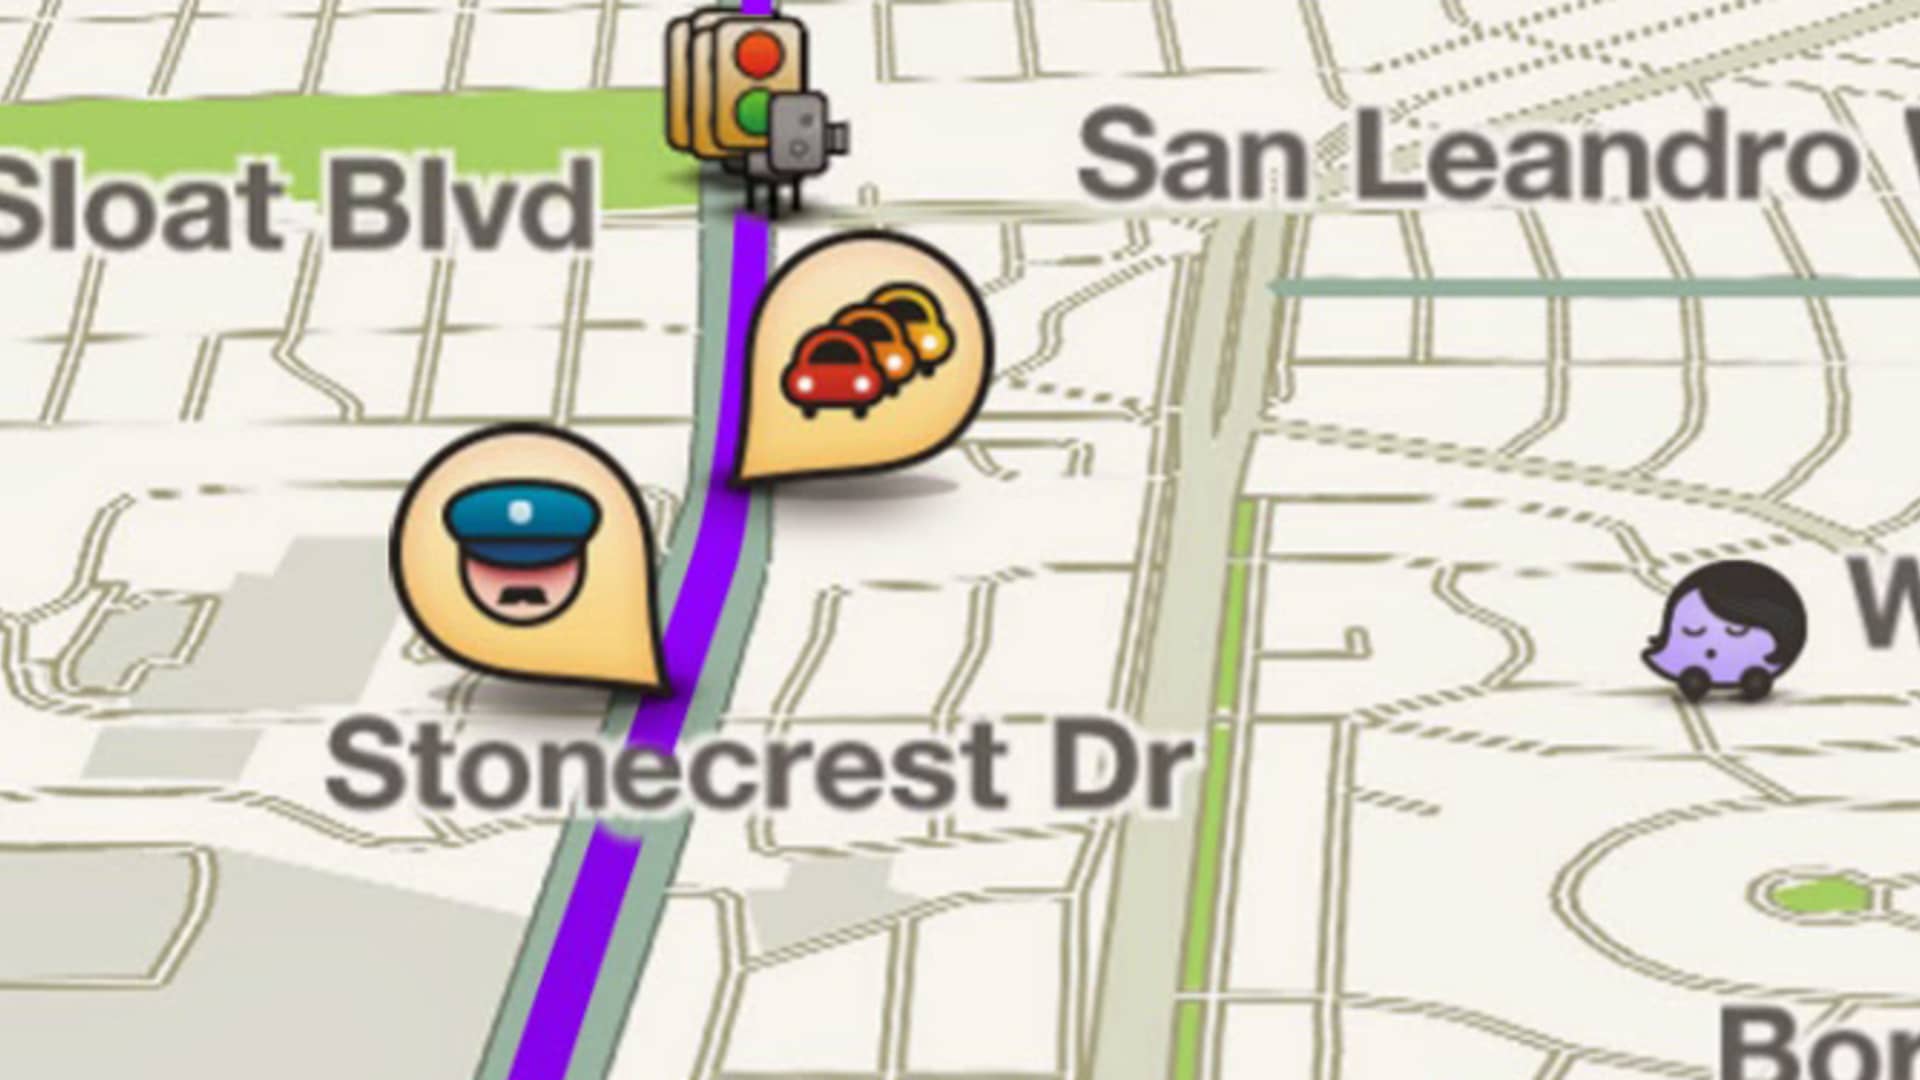 Waze app with icon showing police